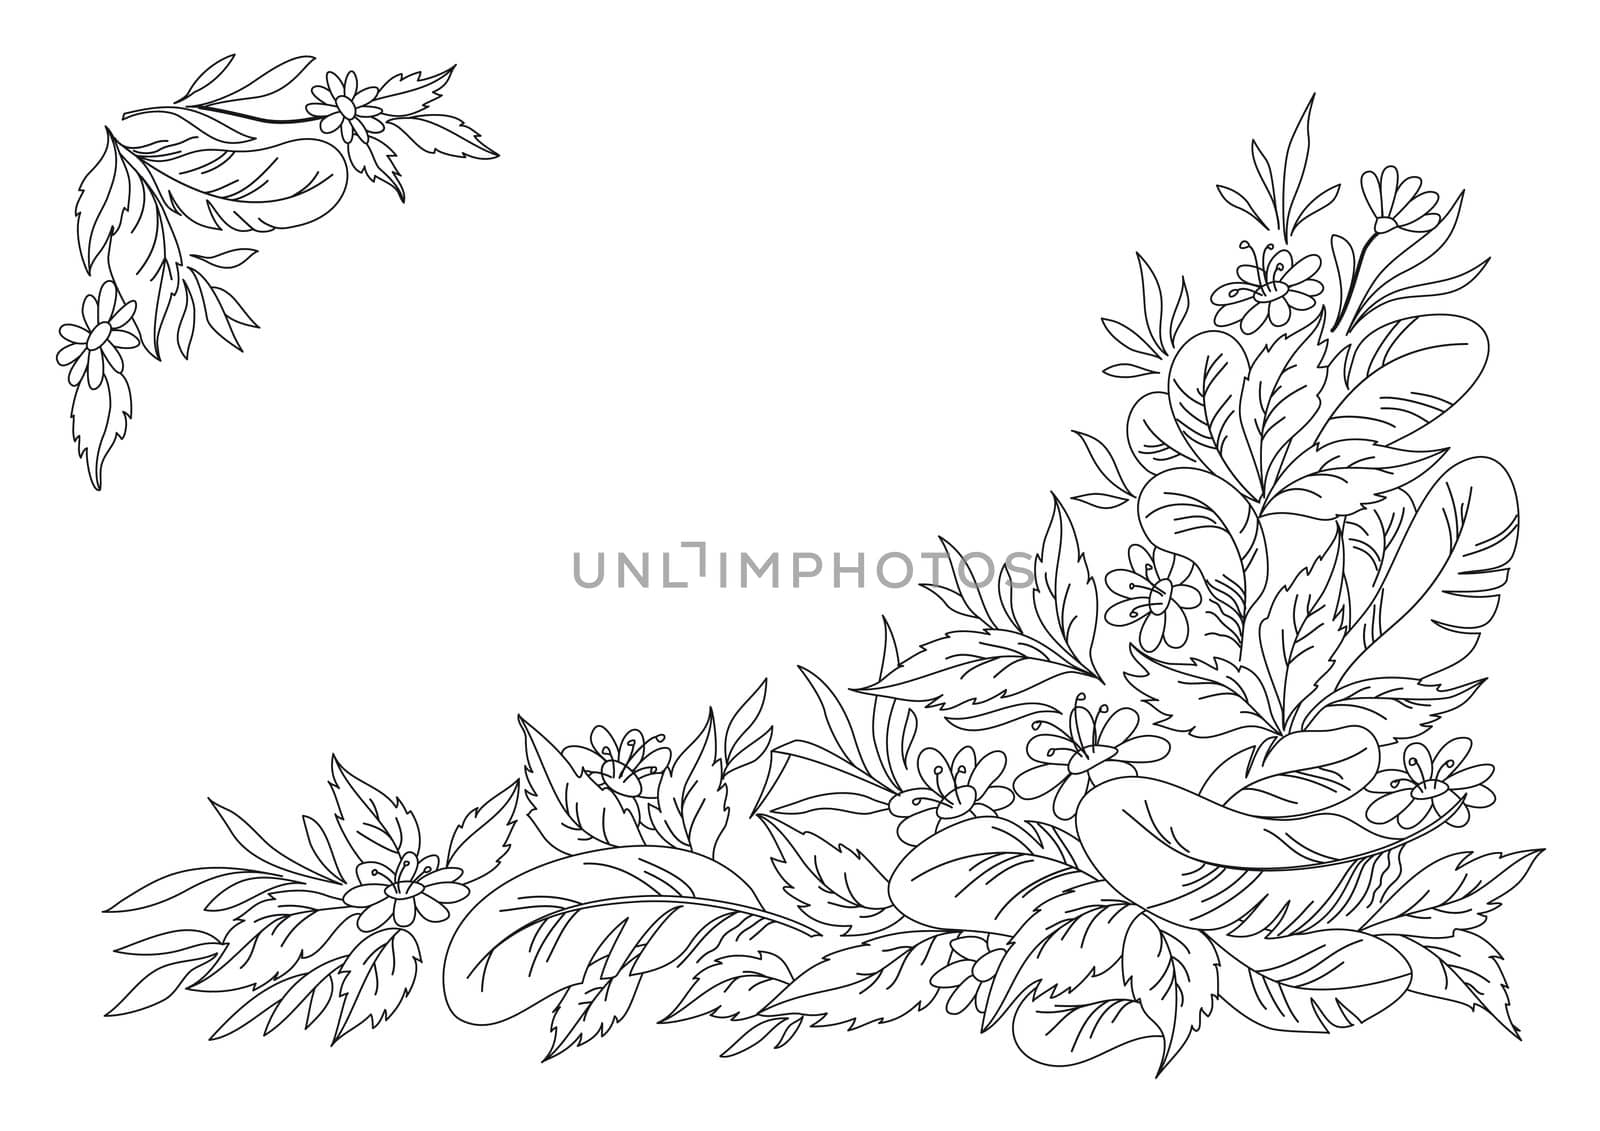 Abstract background, graphic monochrome pattern: leaves, flowers and feathers